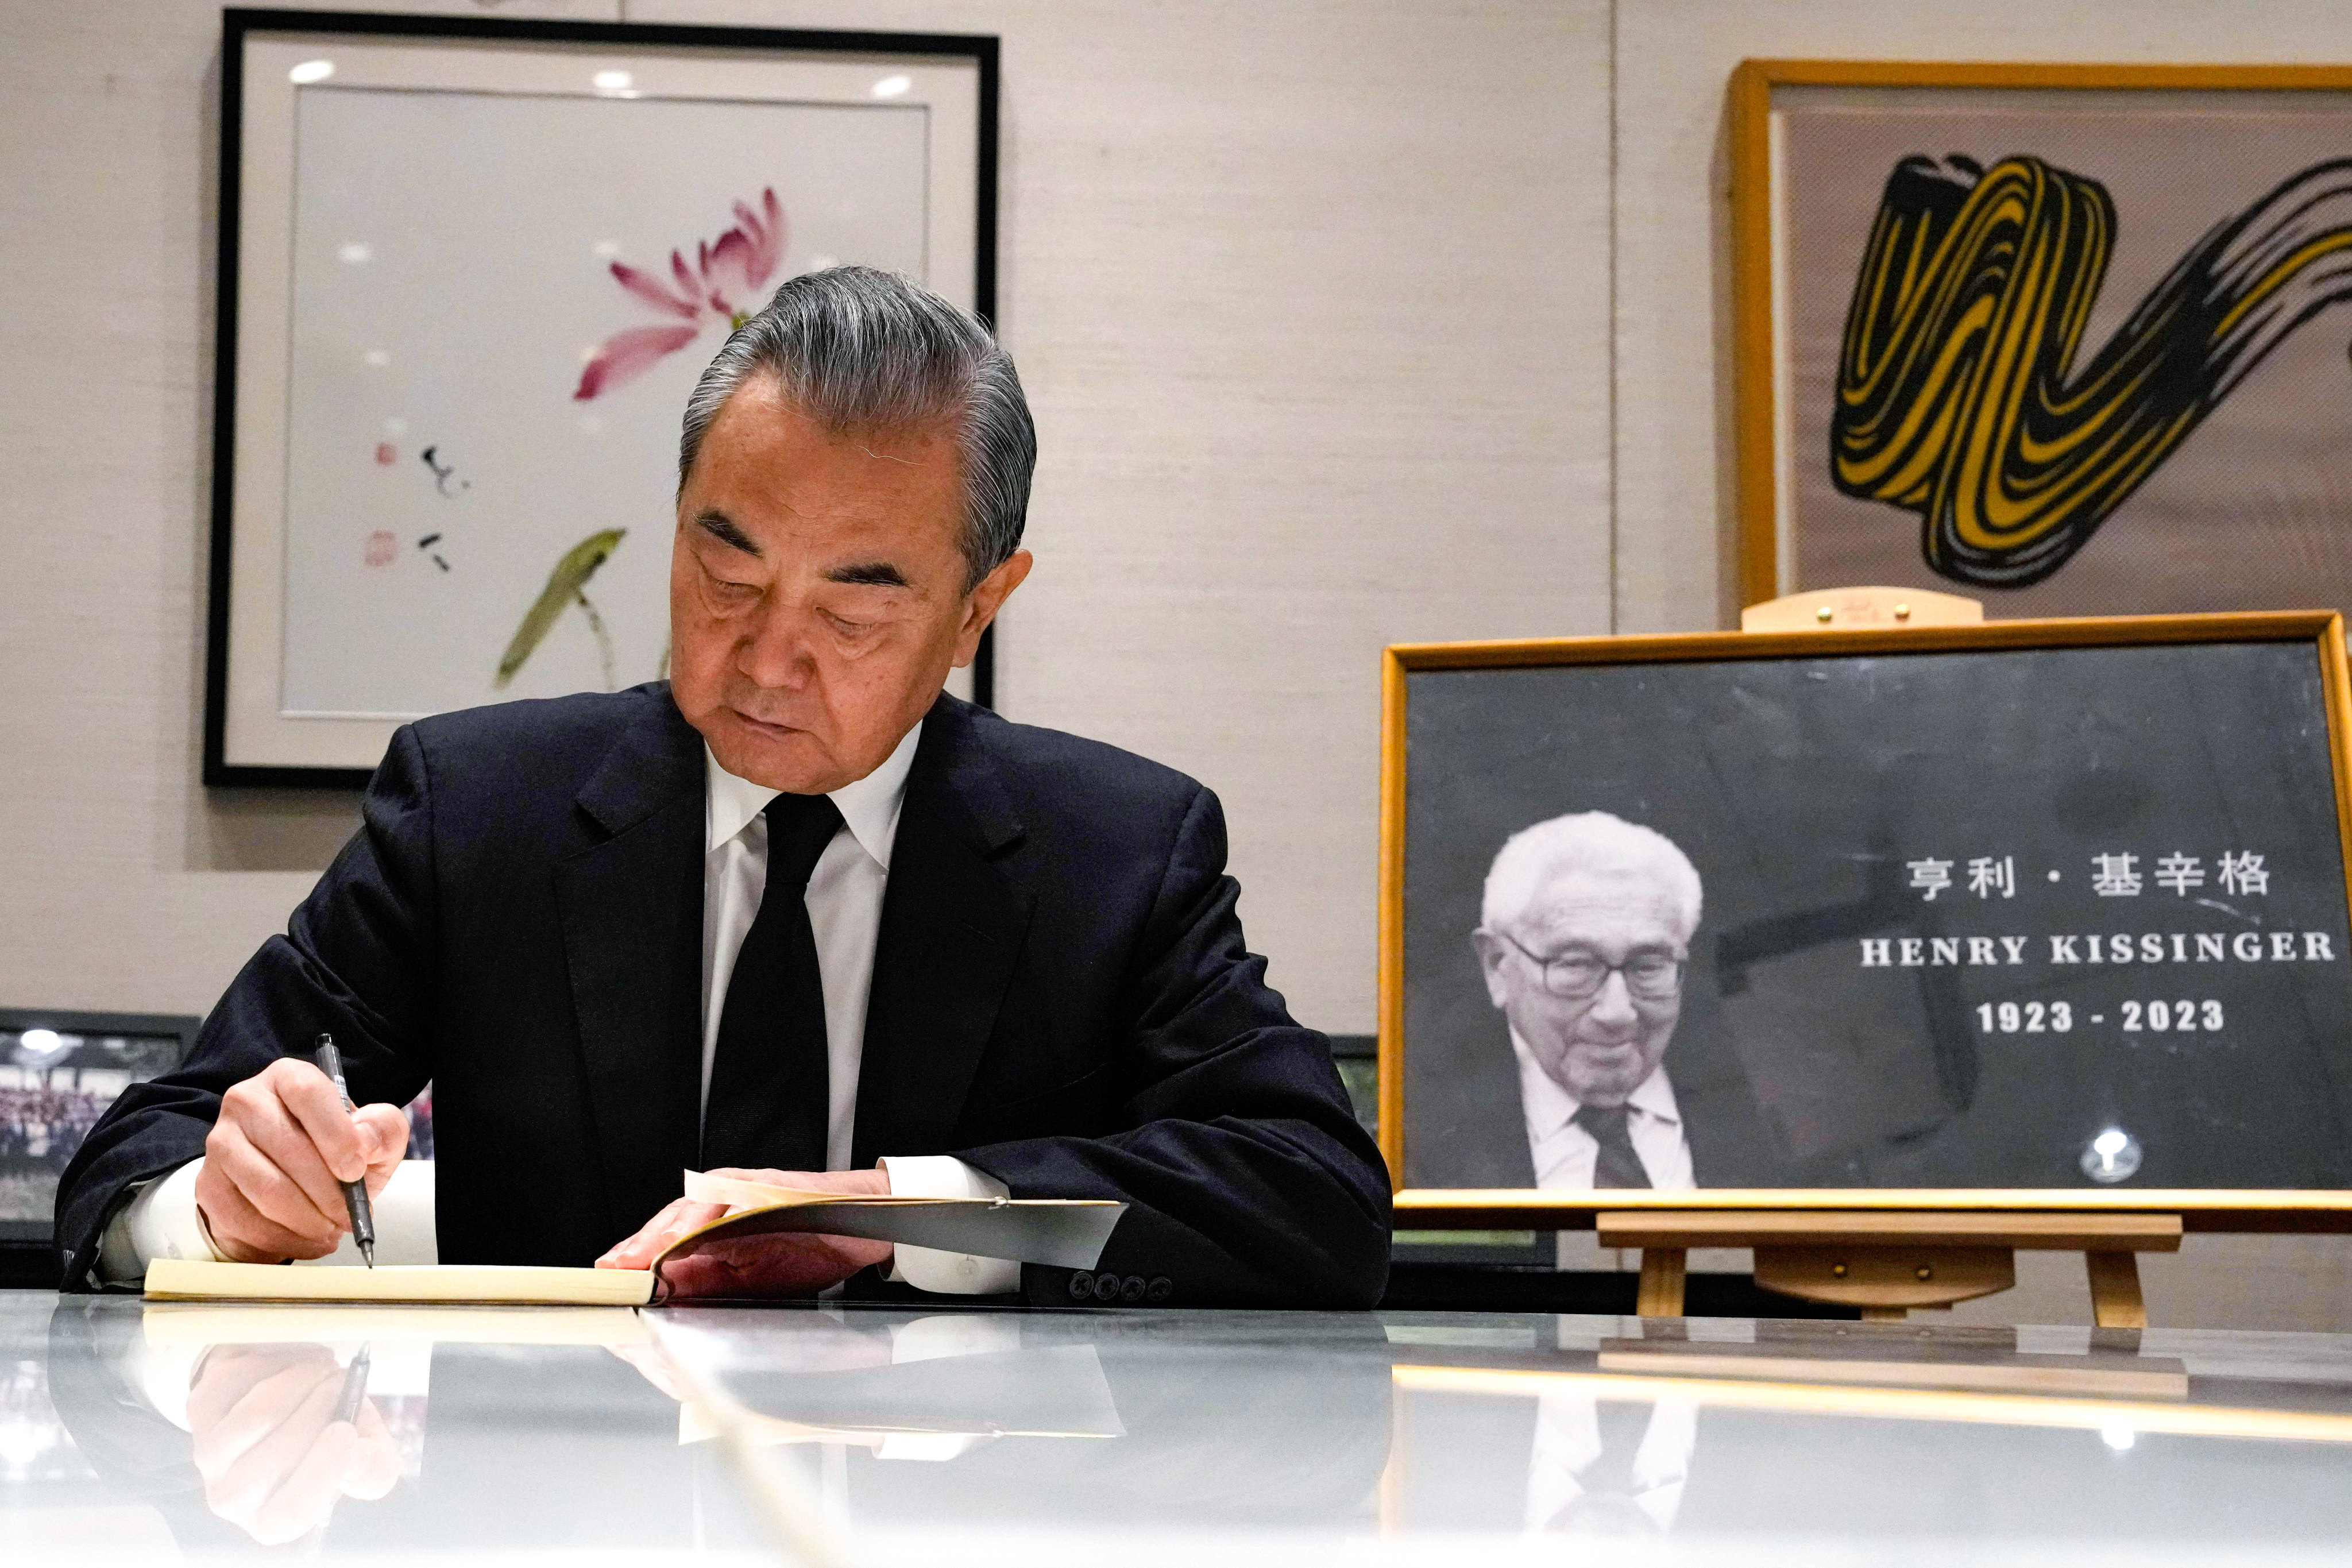 Chinese Foreign Minister Wang Yi signs a condolence book for Henry Kissinger at the US embassy in Beijing on Tuesday. Photo: AP